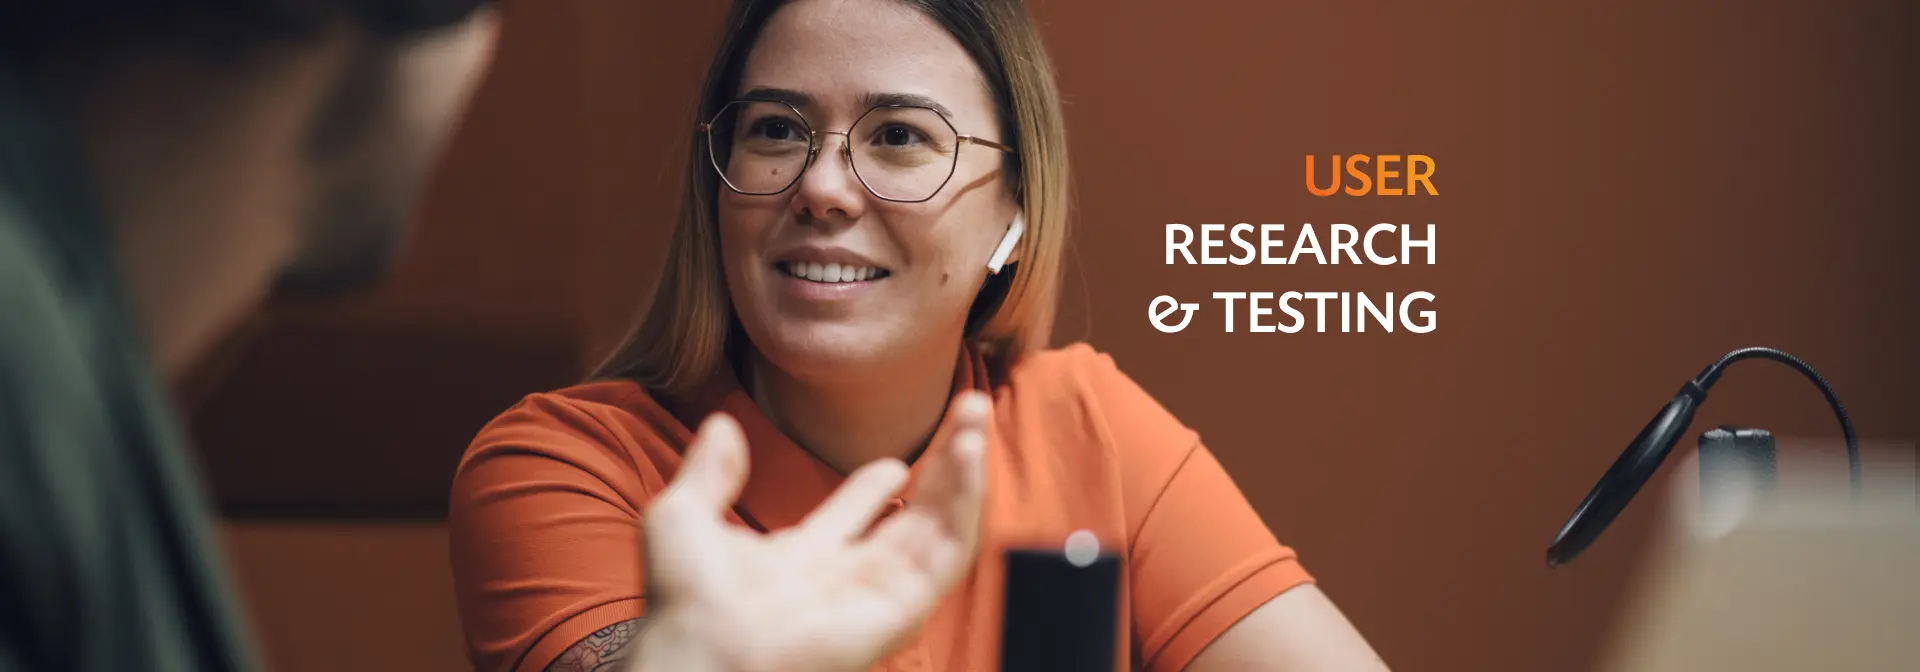 User Research & Usability Testing